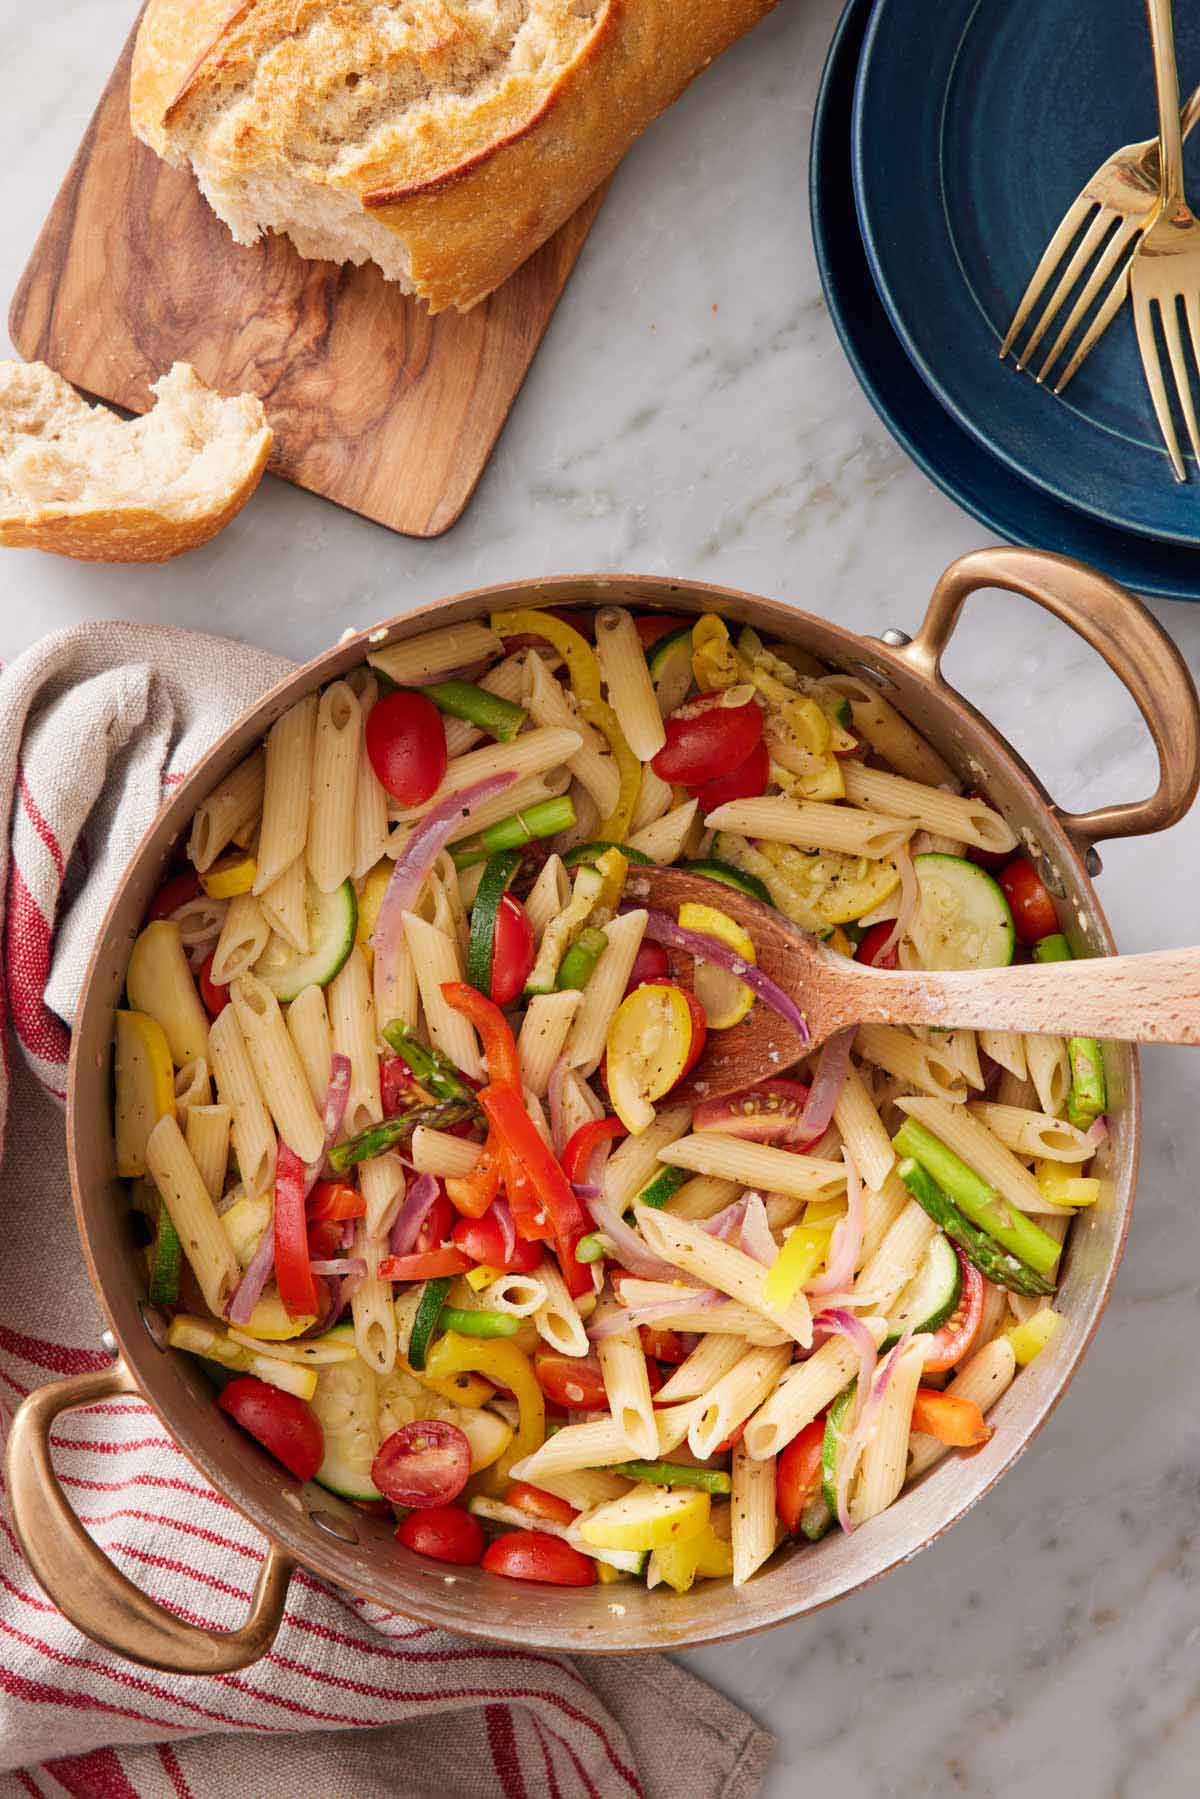 Overhead view of a pot of pasta primavera with some torn bread and a stack of plate with forks on the side.